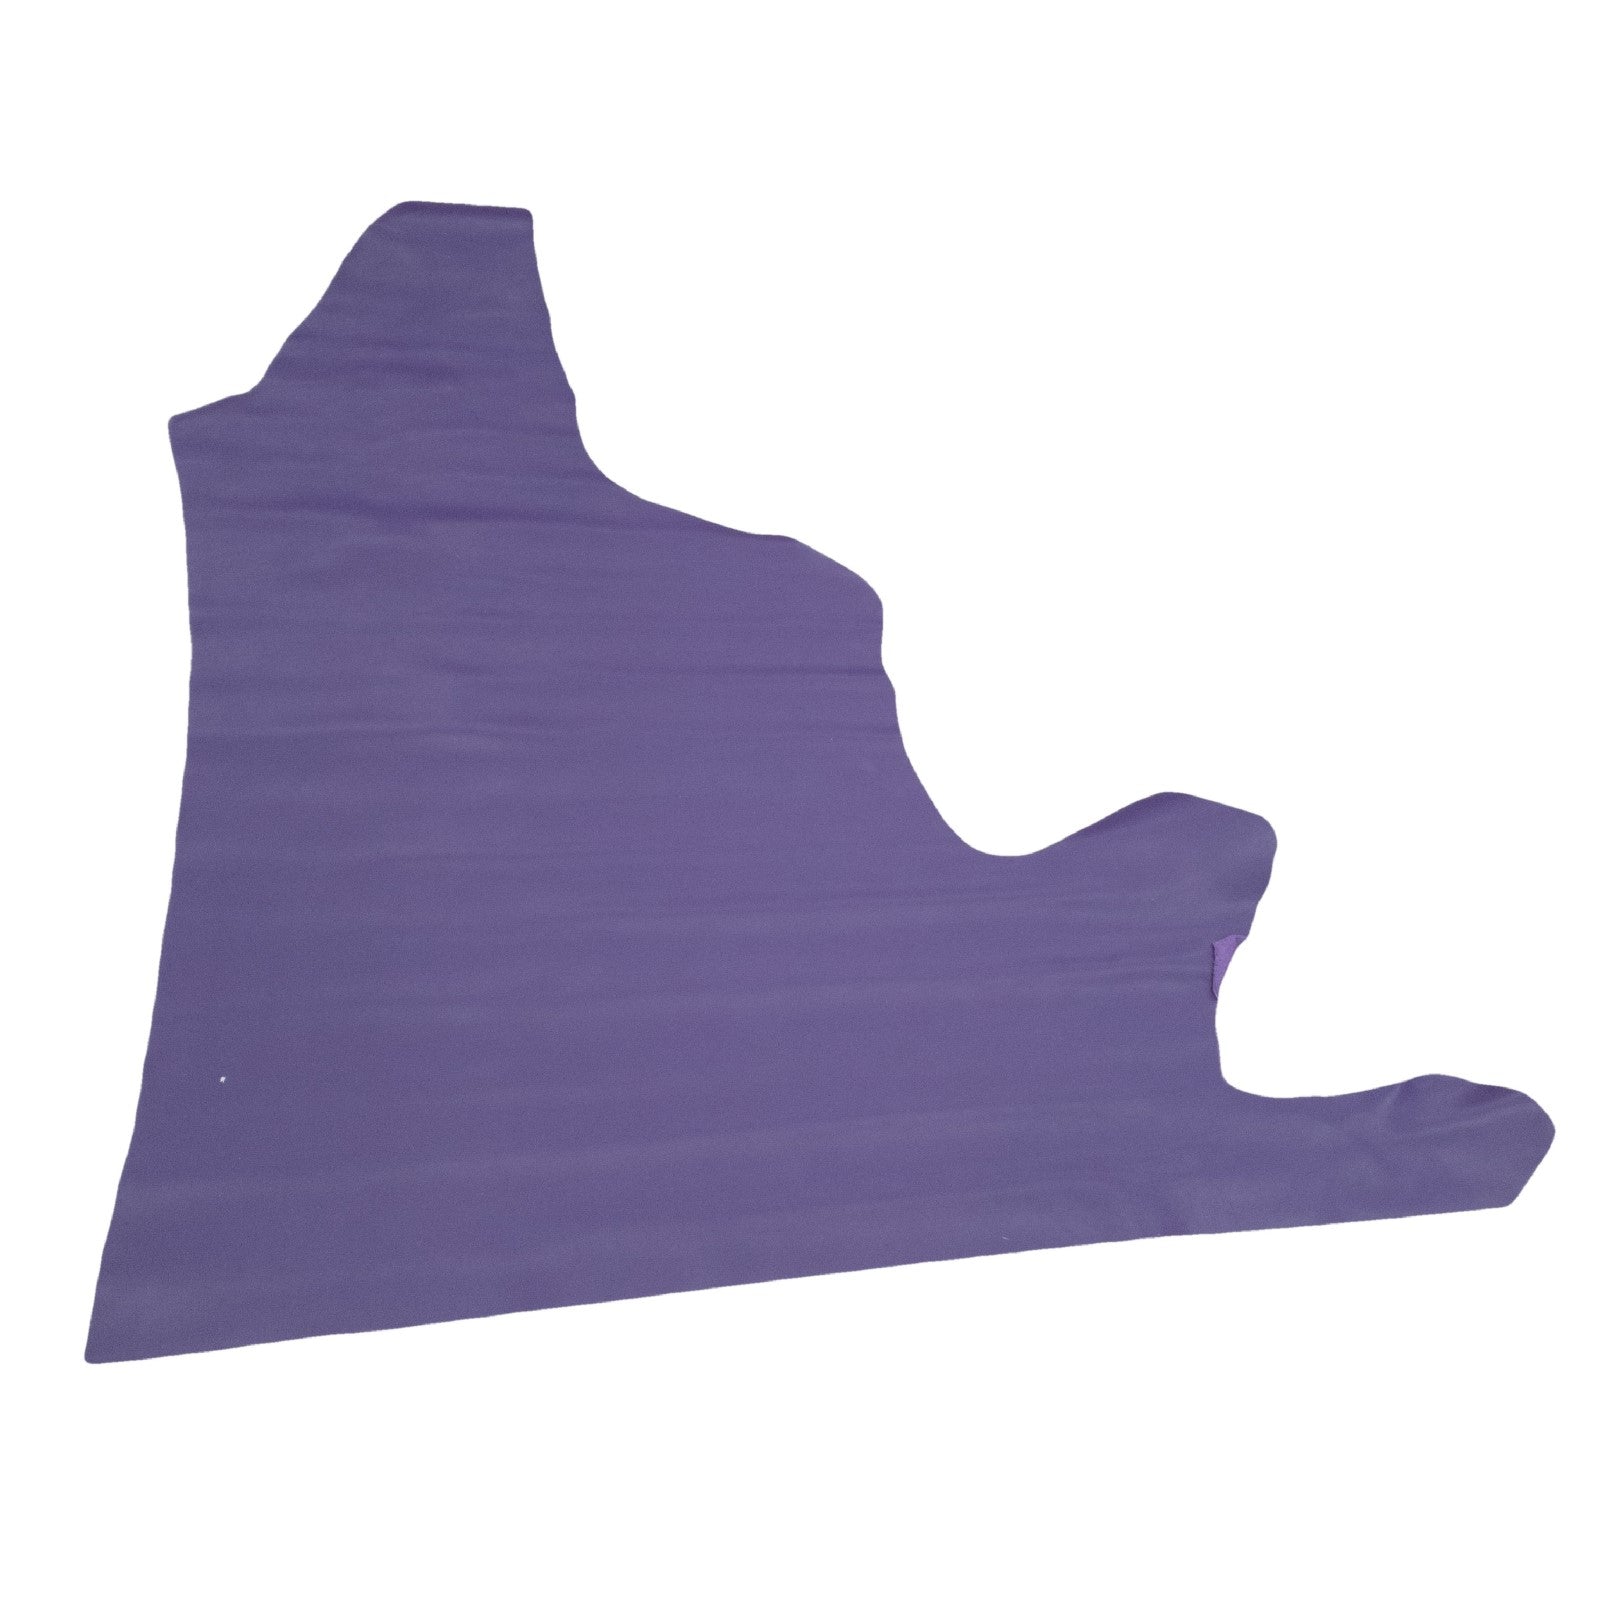 Kings Poppin' Purple, 3-3.5 oz Cow Hides, Starting Lineup, Top Piece / 6.5-7.5 Sq Ft | The Leather Guy